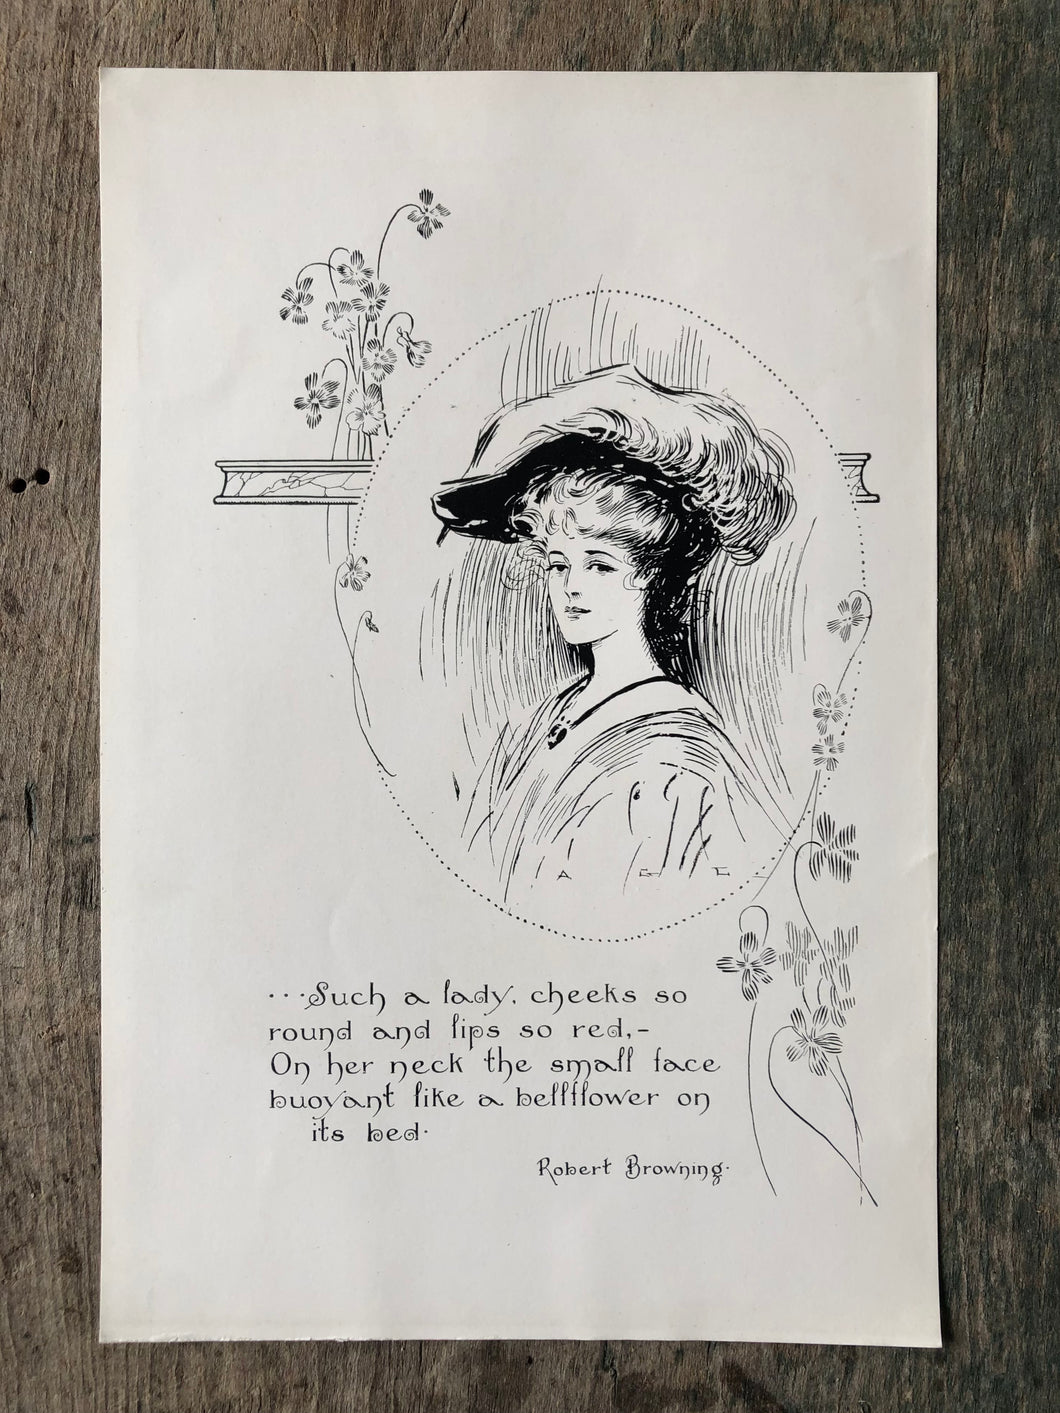 Robert Browning Quote Print illustrated by Arthur G. Learned from “Eve’s Daughter”